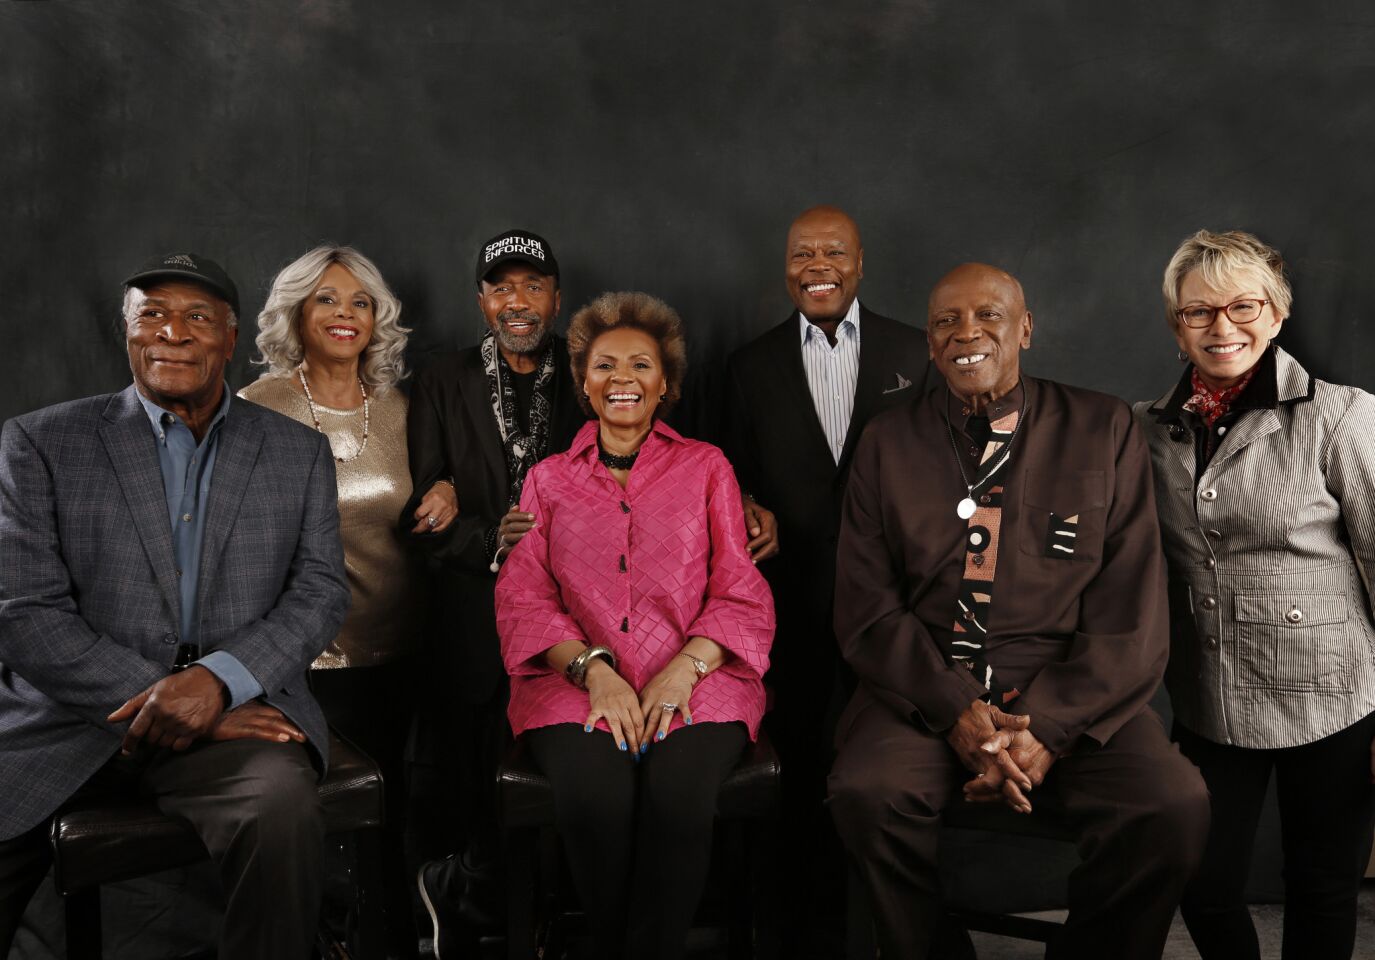 Now: The original members of the TV show "Roots," pictured on May 11, 2016: John Amos, left, Lynne Moody, Ben Vereen, Leslie Uggams, Georg Stanford Brown, Louis Gossett Jr., Sandy Duncan. Here are some photos from their roles in 1977 and now.